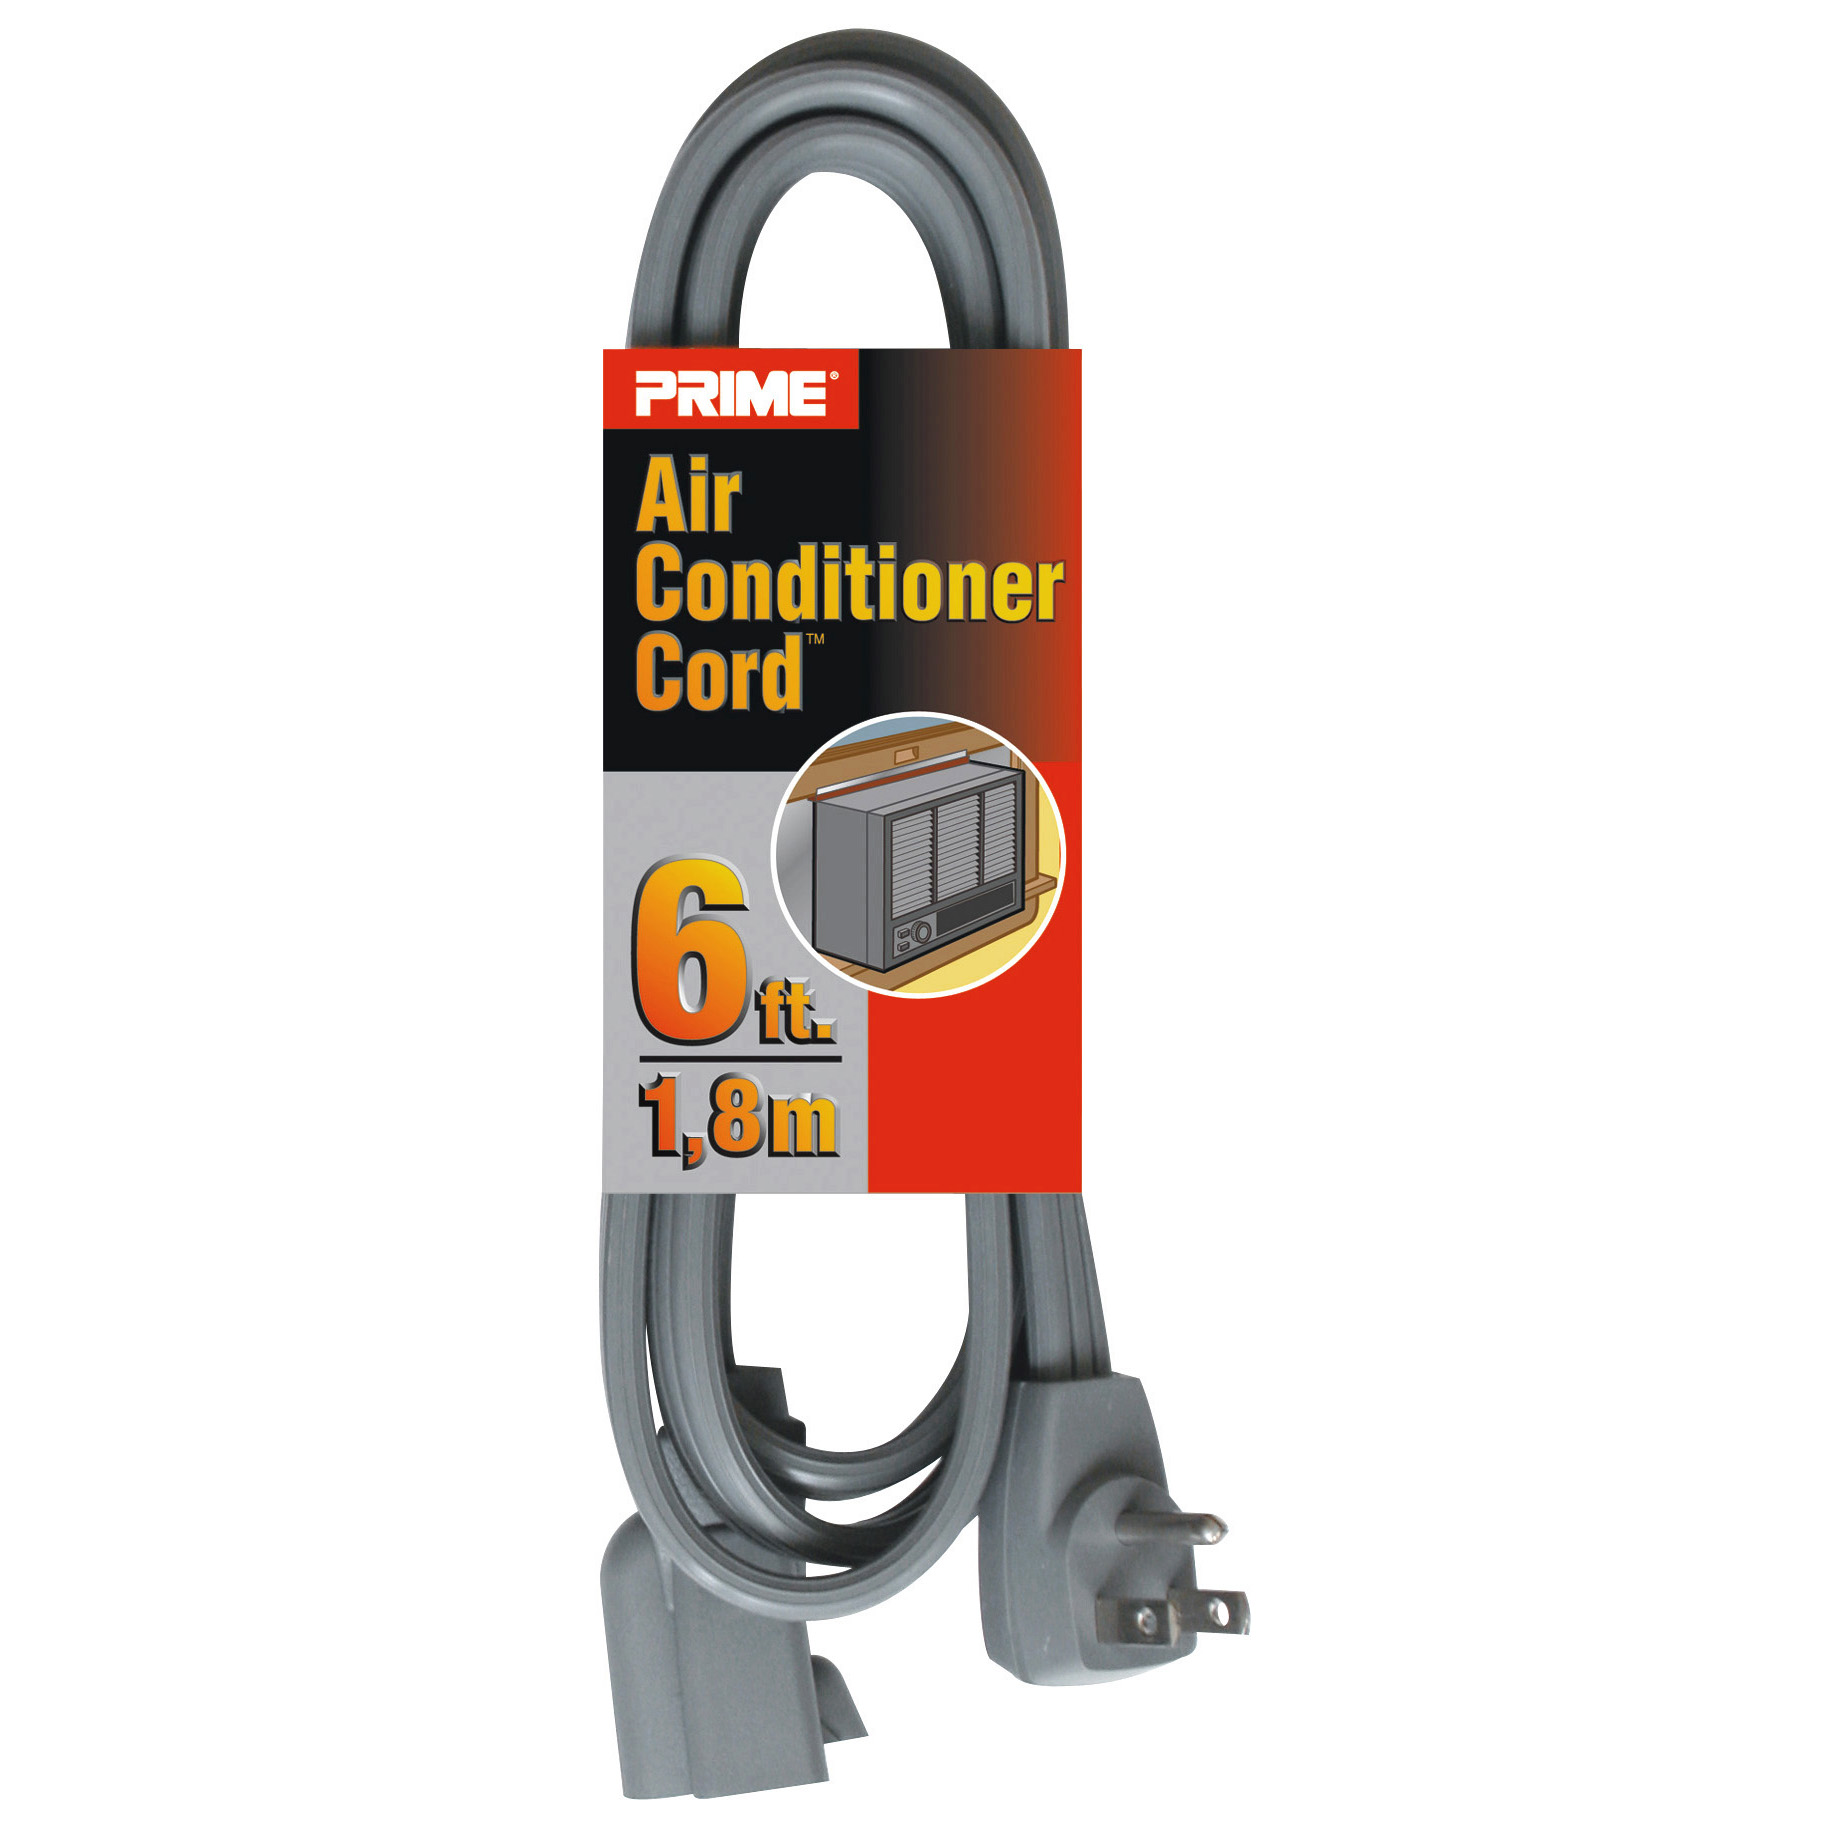 EC680506L Air Conditioner and Major Appliance Extension Cord, Gray, 6-Feet